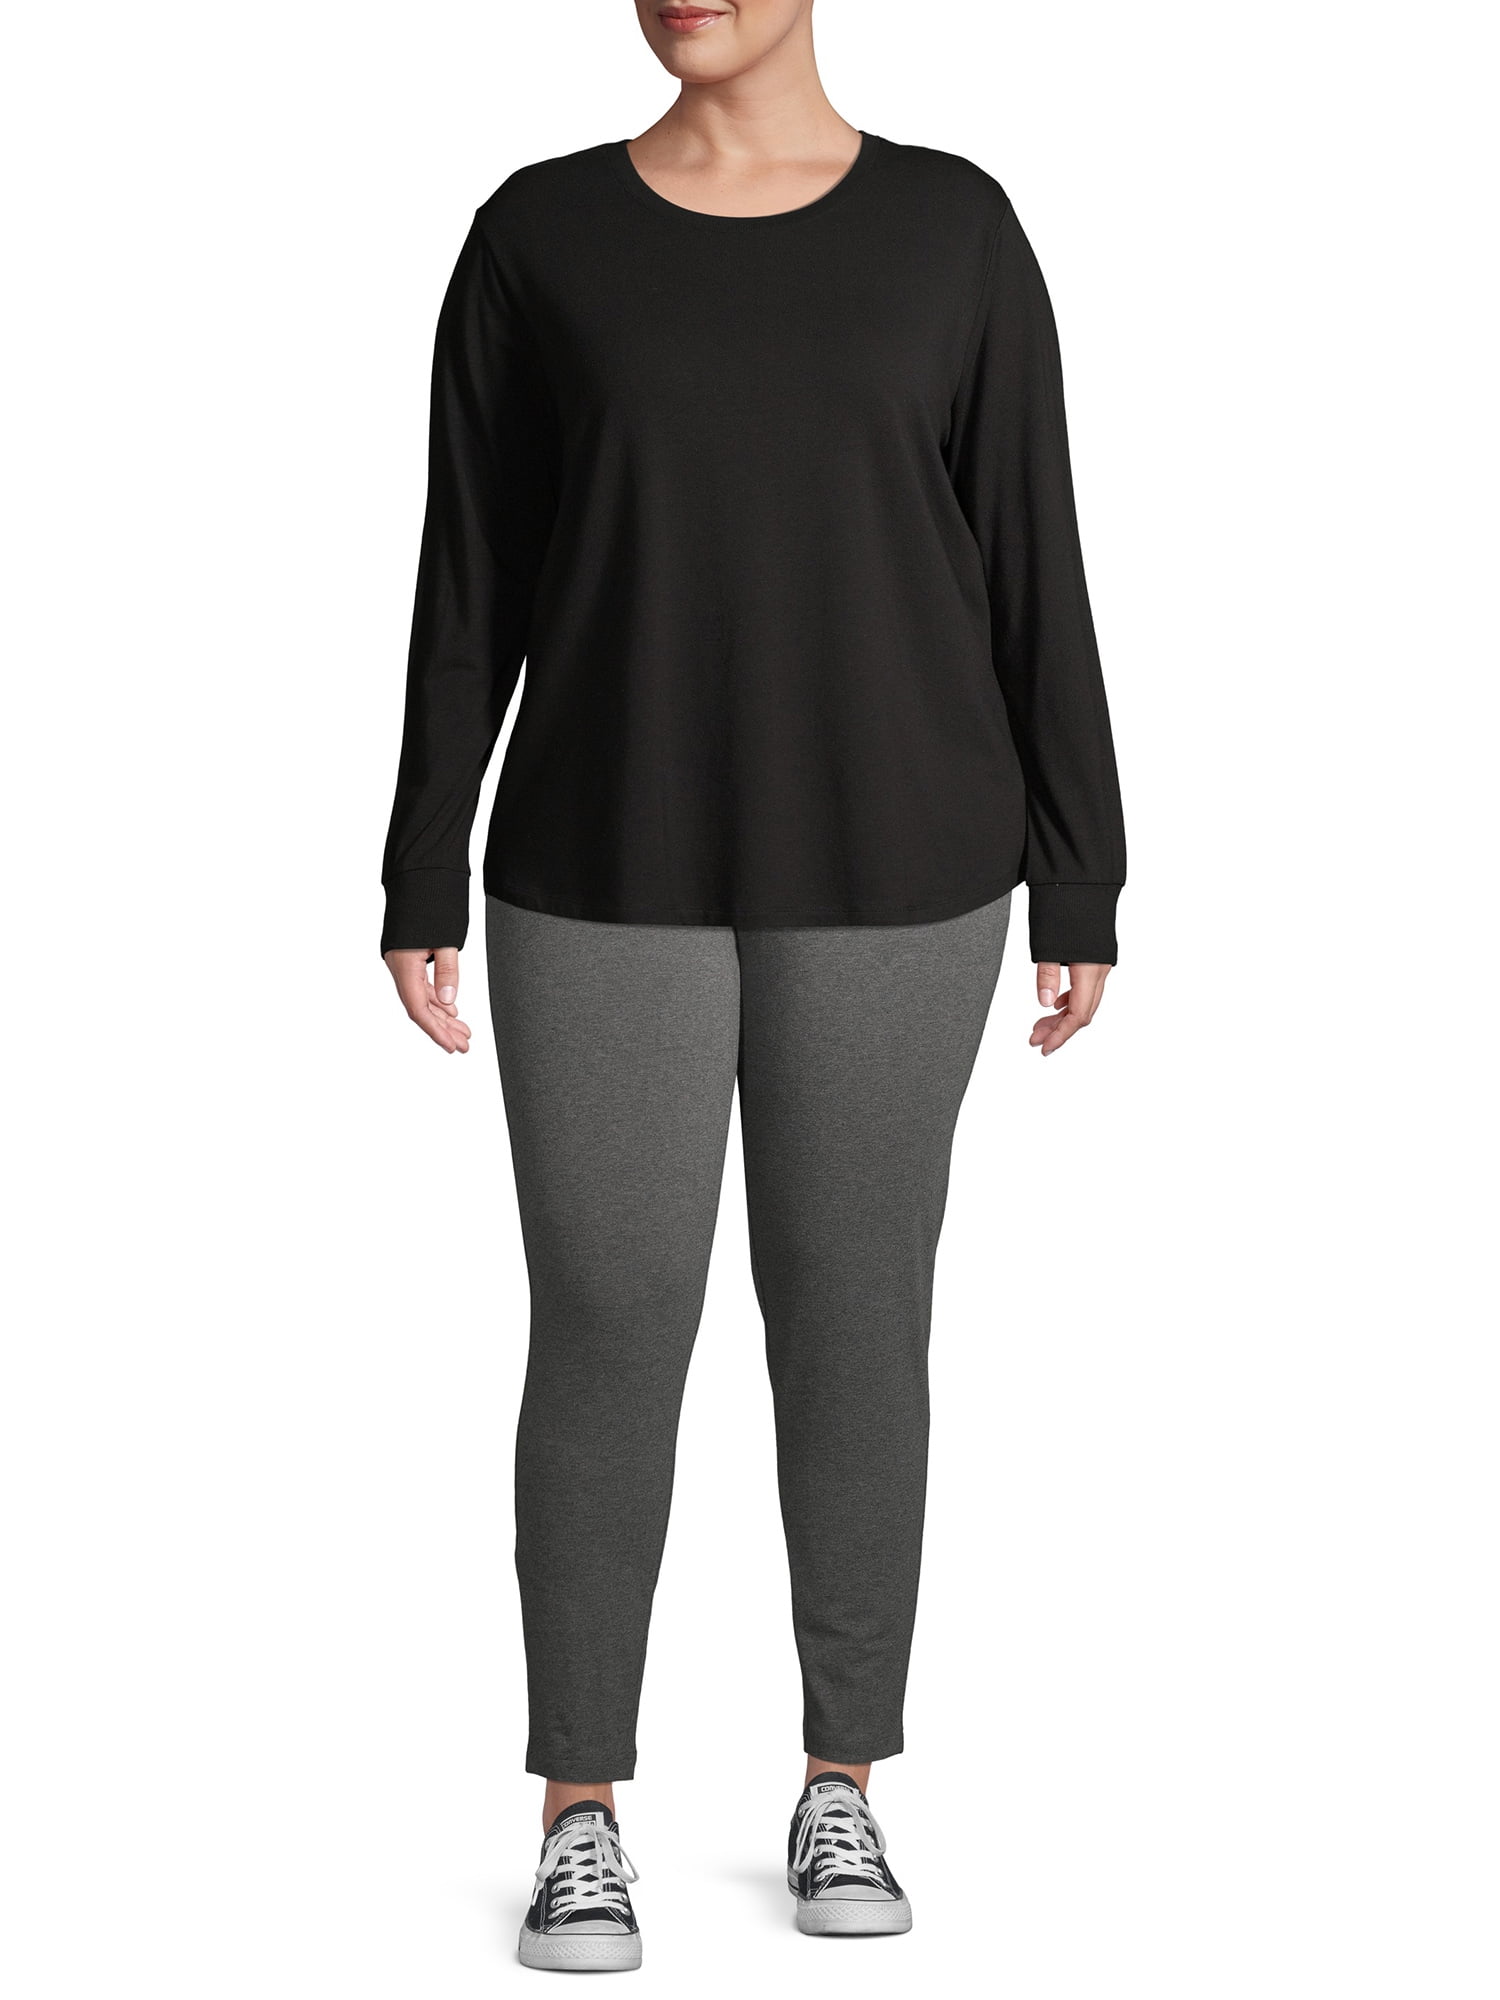 Terra & Sky High Rise Fitted Leggings Black - Plus Size 4X (28W-30W)  Stretch : Buy Online in the UAE, Price from 219 EAD & Shipping to Dubai